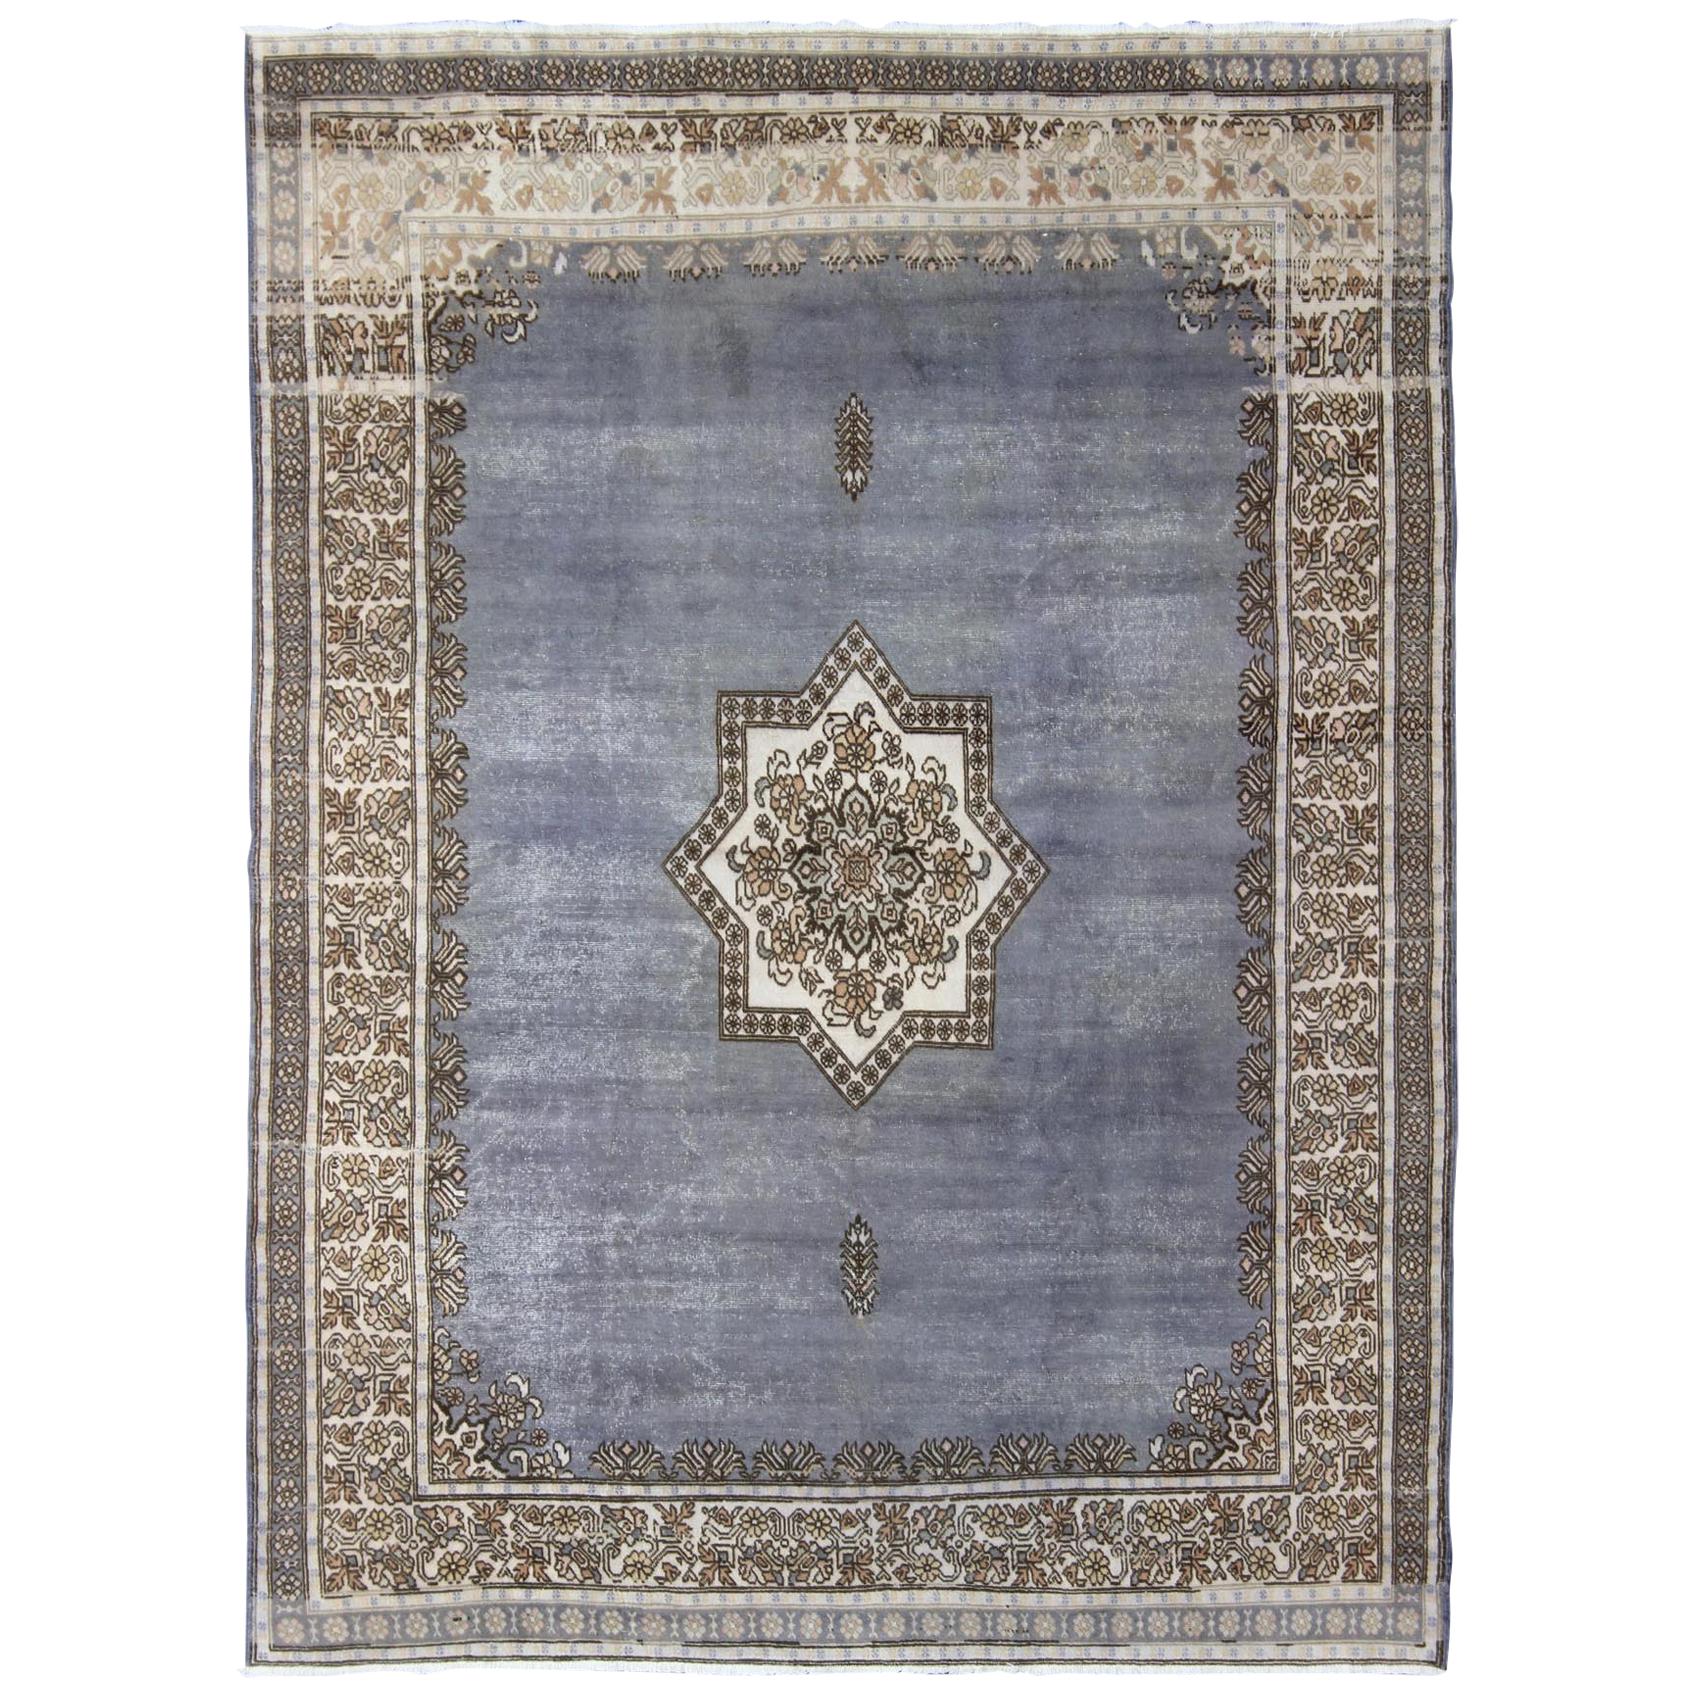 Vintage Moroccan Rug with Star Medallion